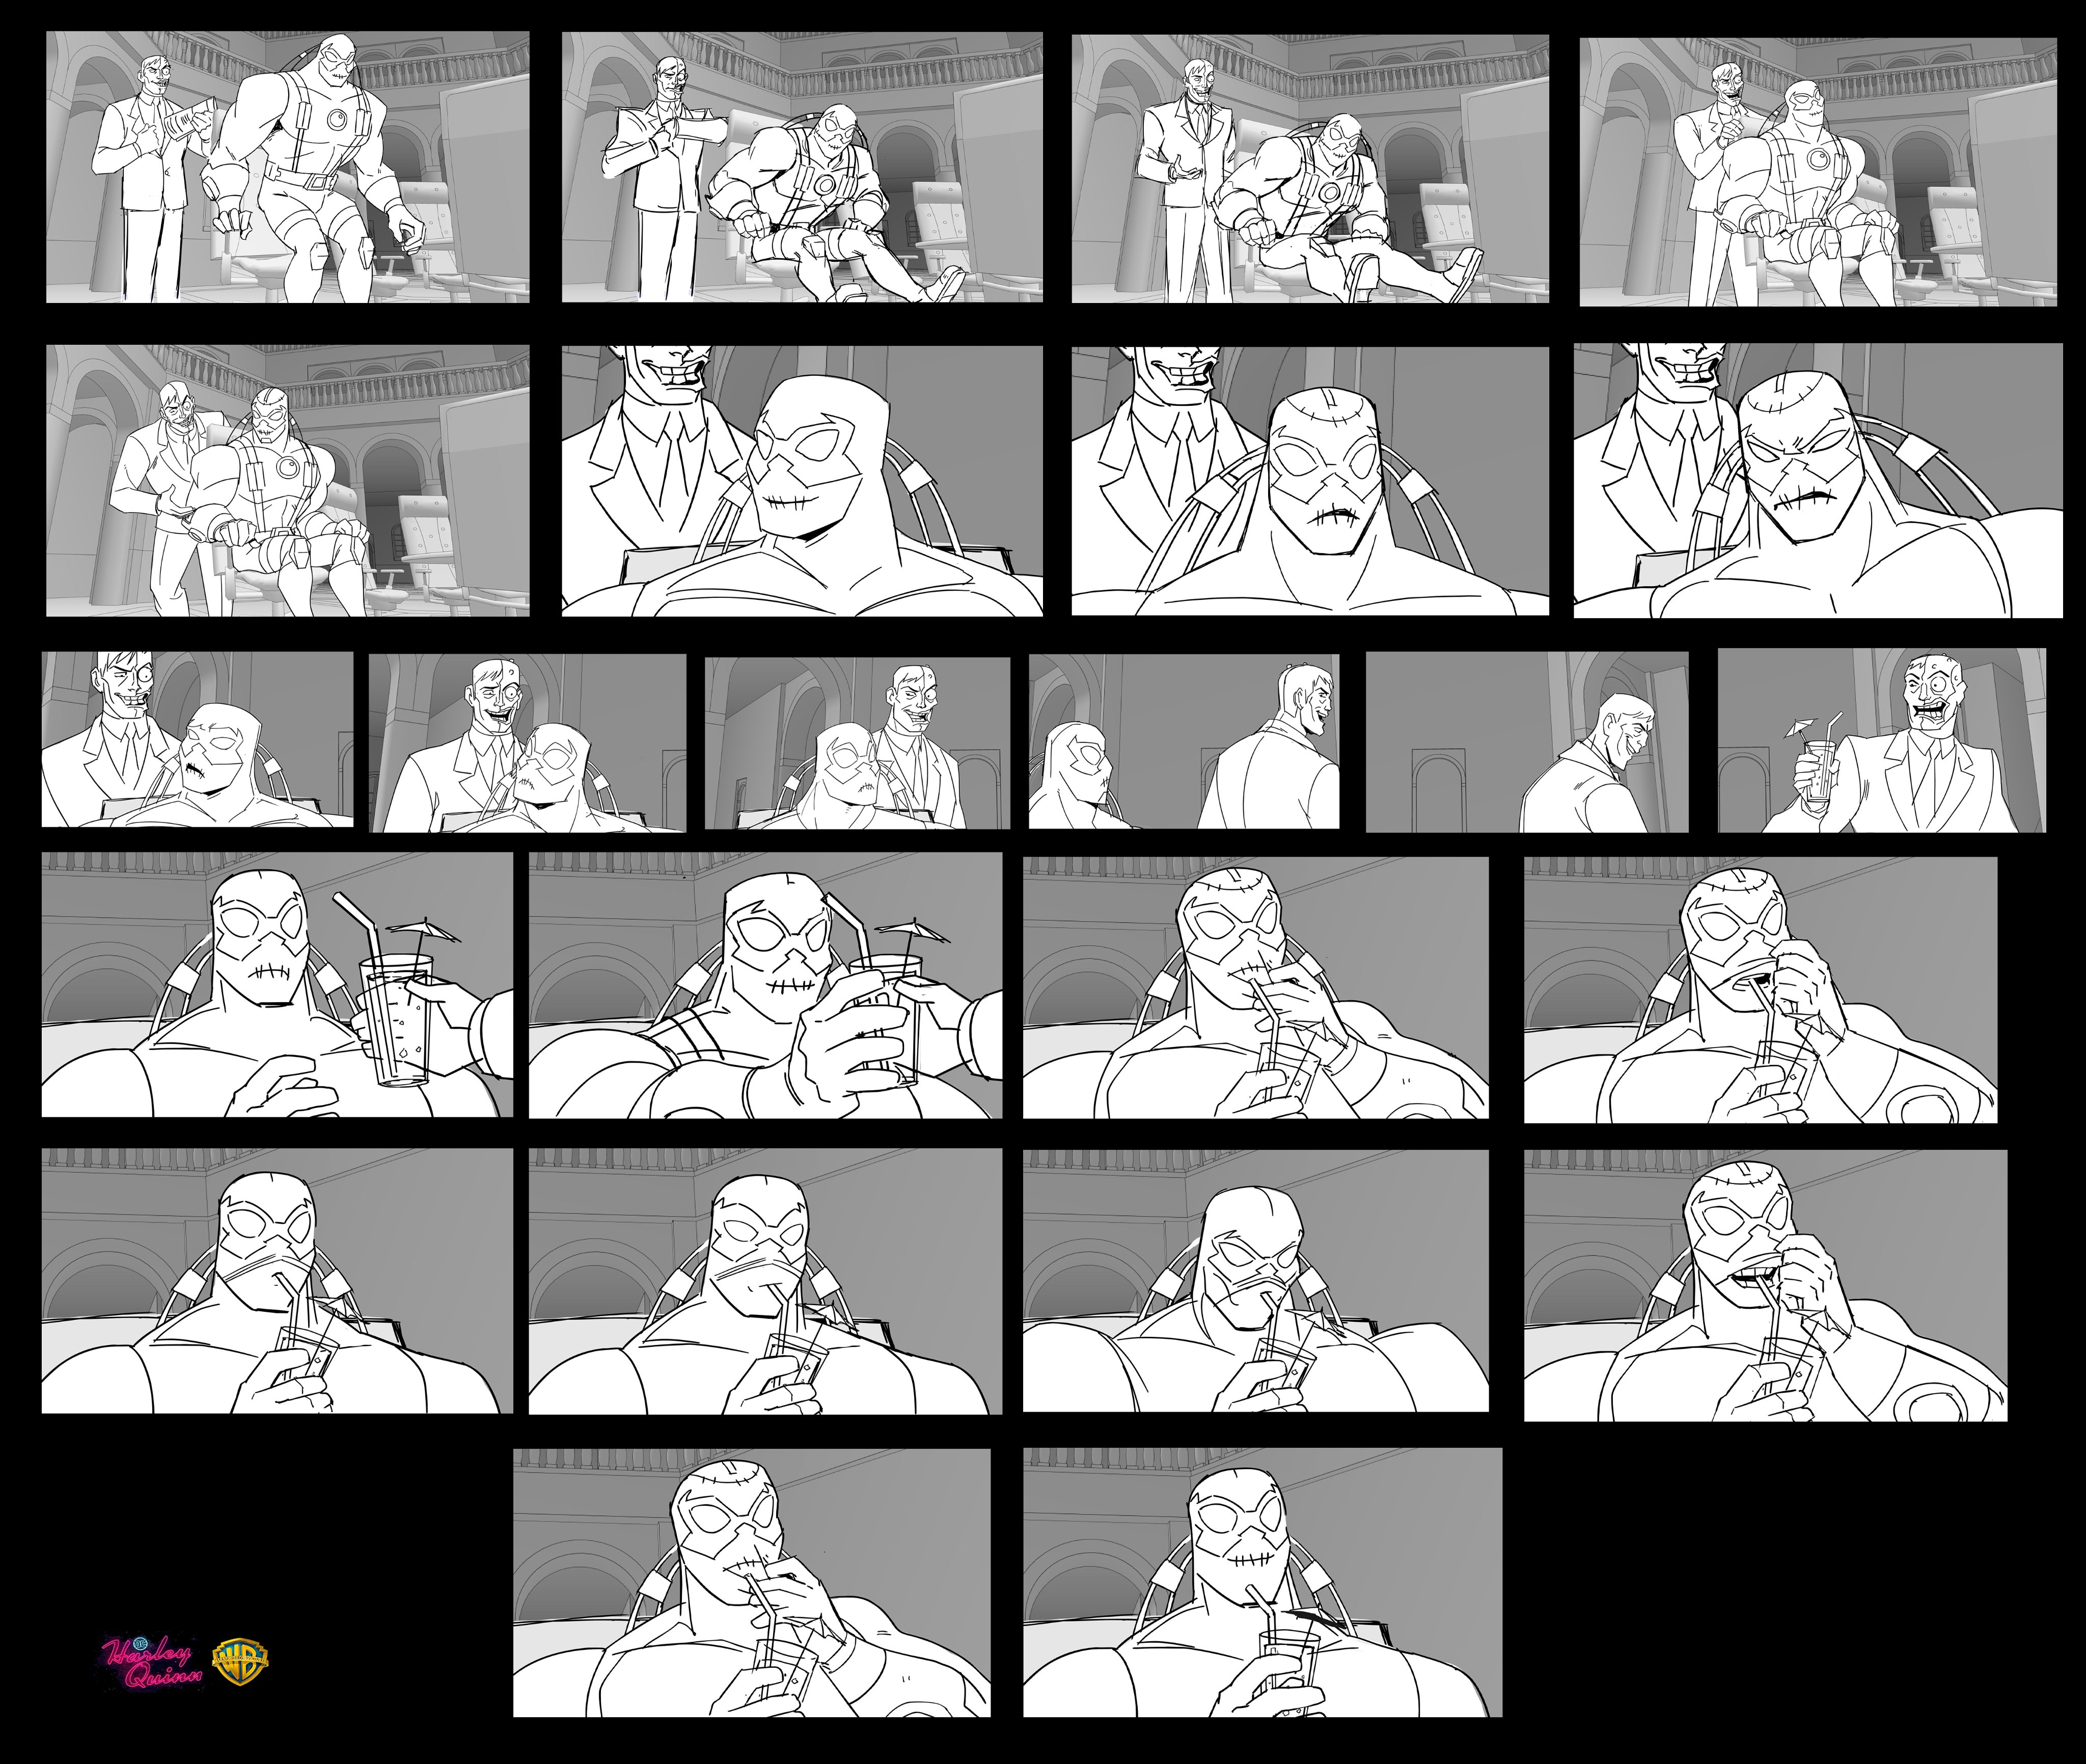 Image:18 HQ Two-Face & Bane 2 storyboard.jpg